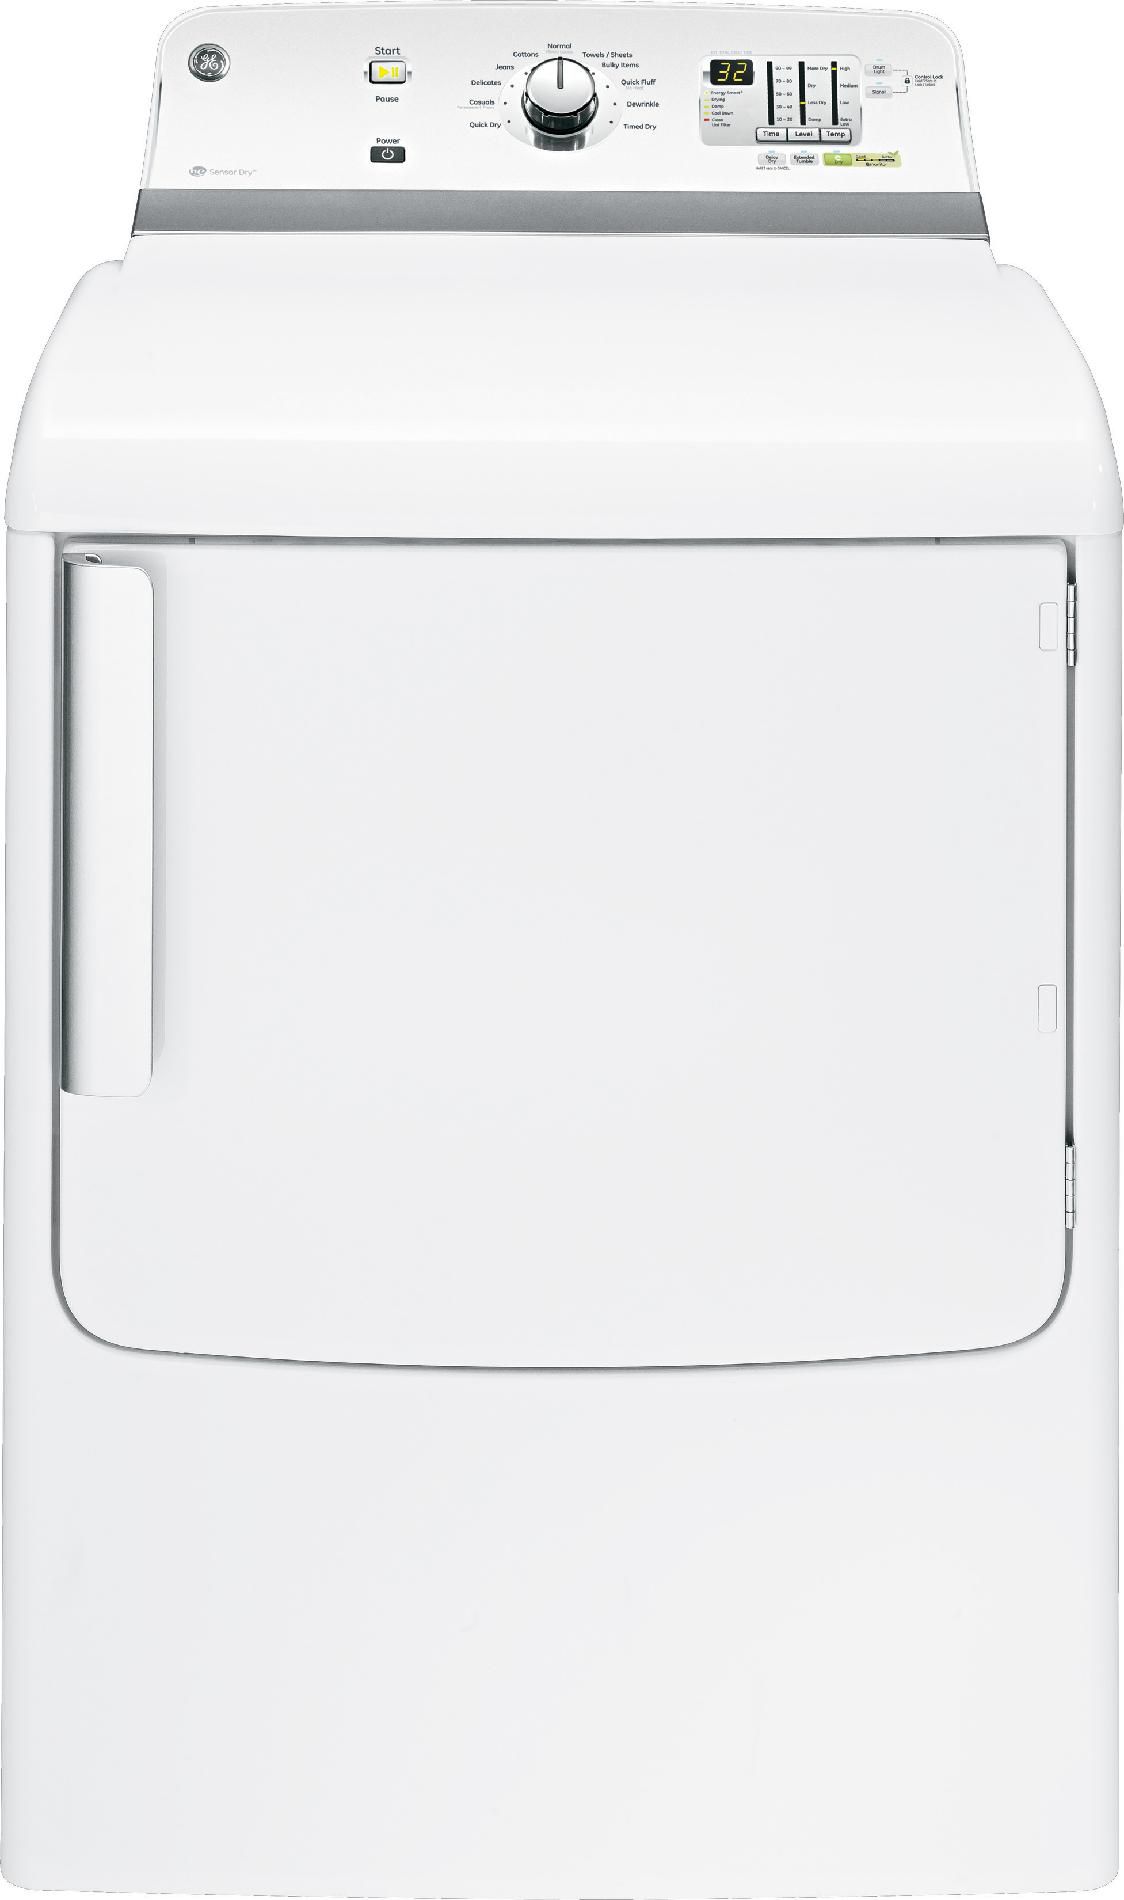 GE 7.8 cu. ft. Electric Dryer - White 7.0 cu. ft. and greater